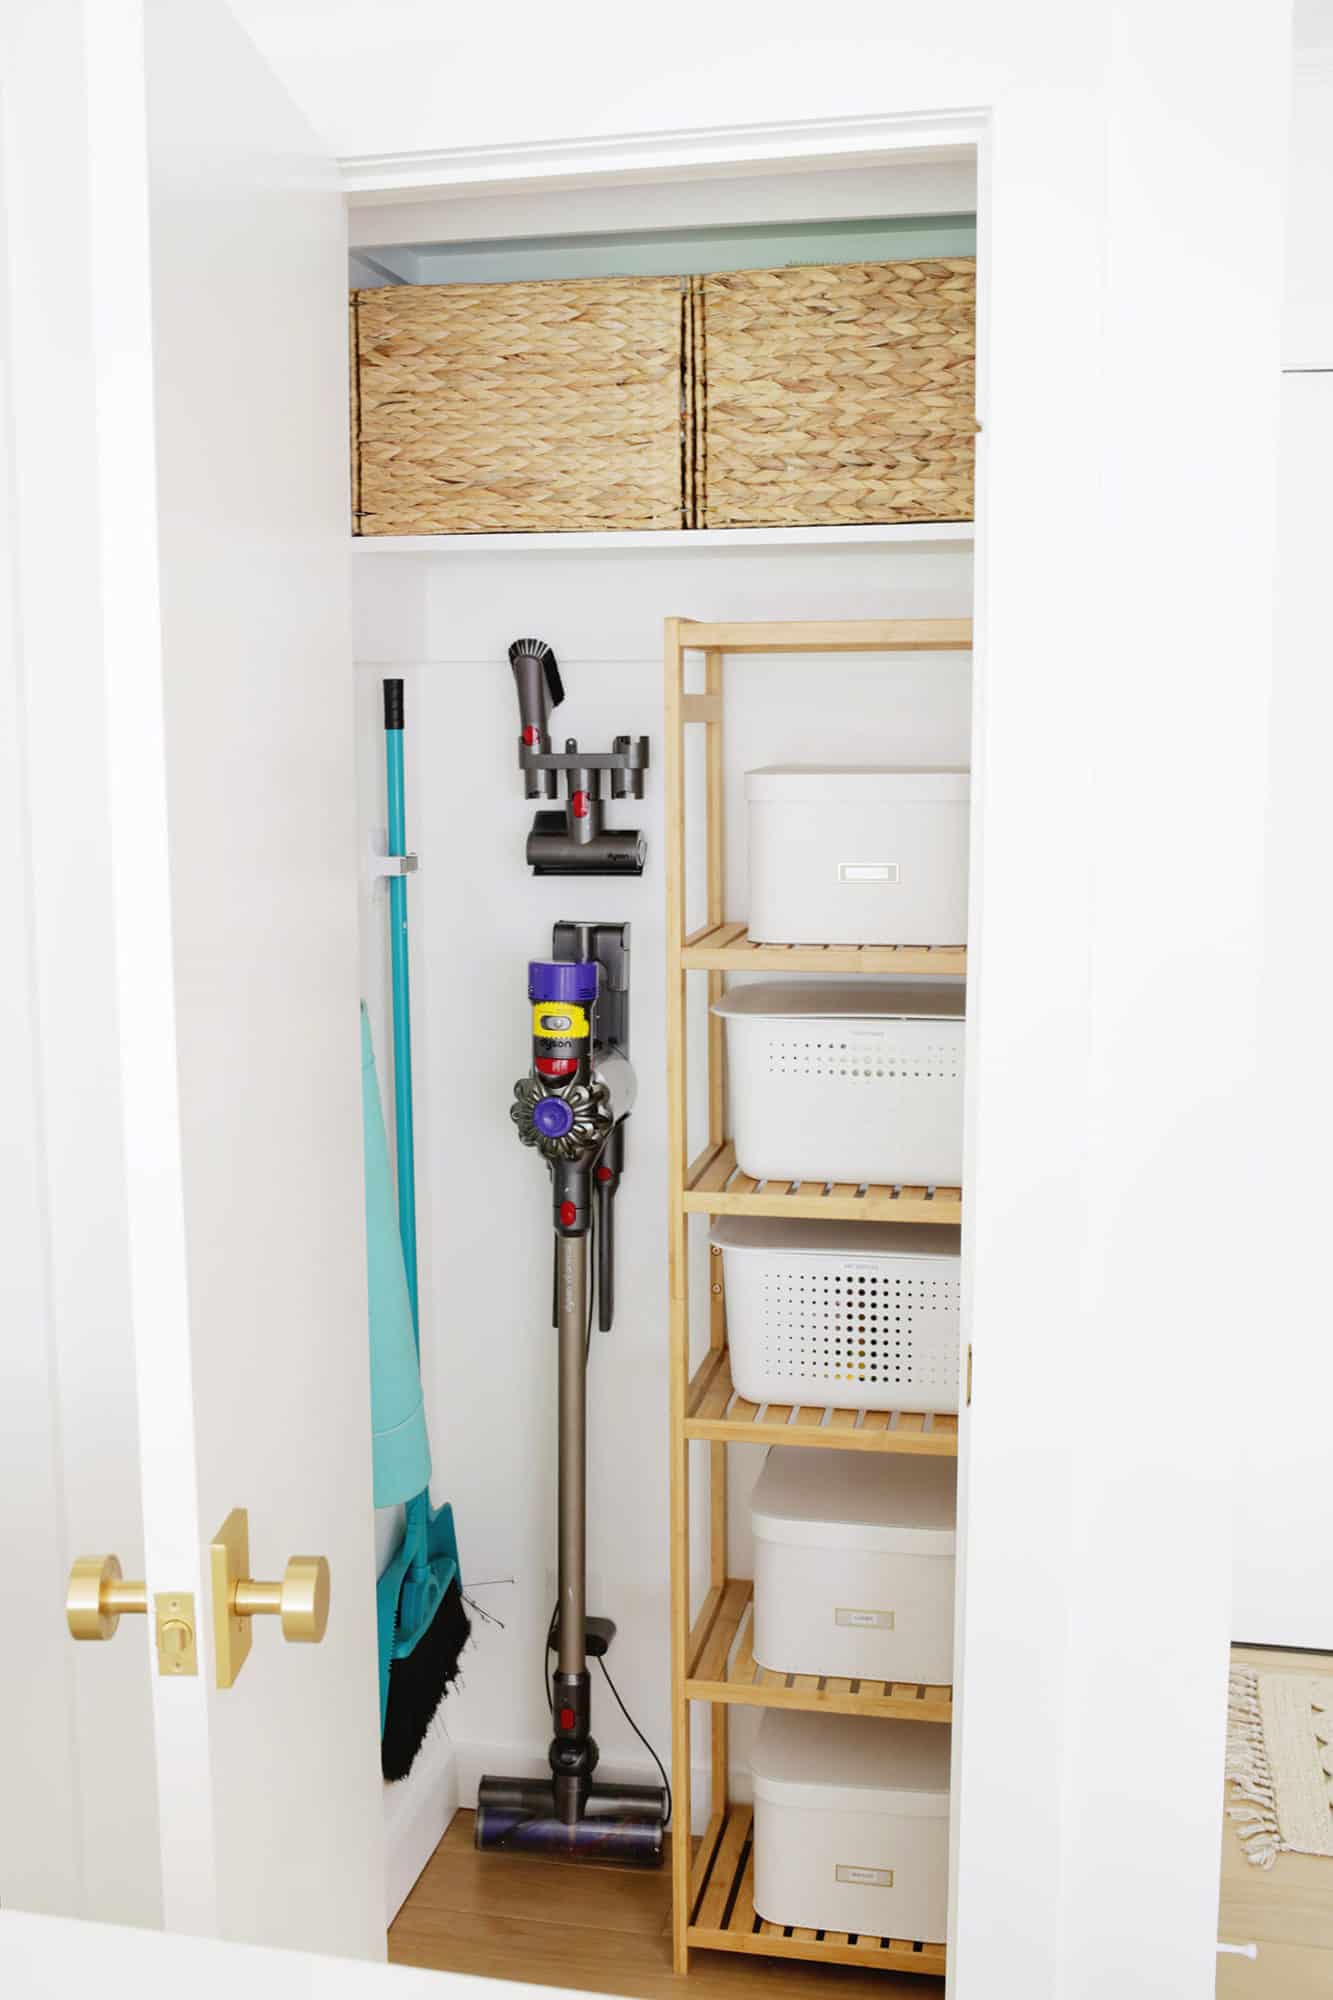 Organized closet with hanging cleaning items and baskets